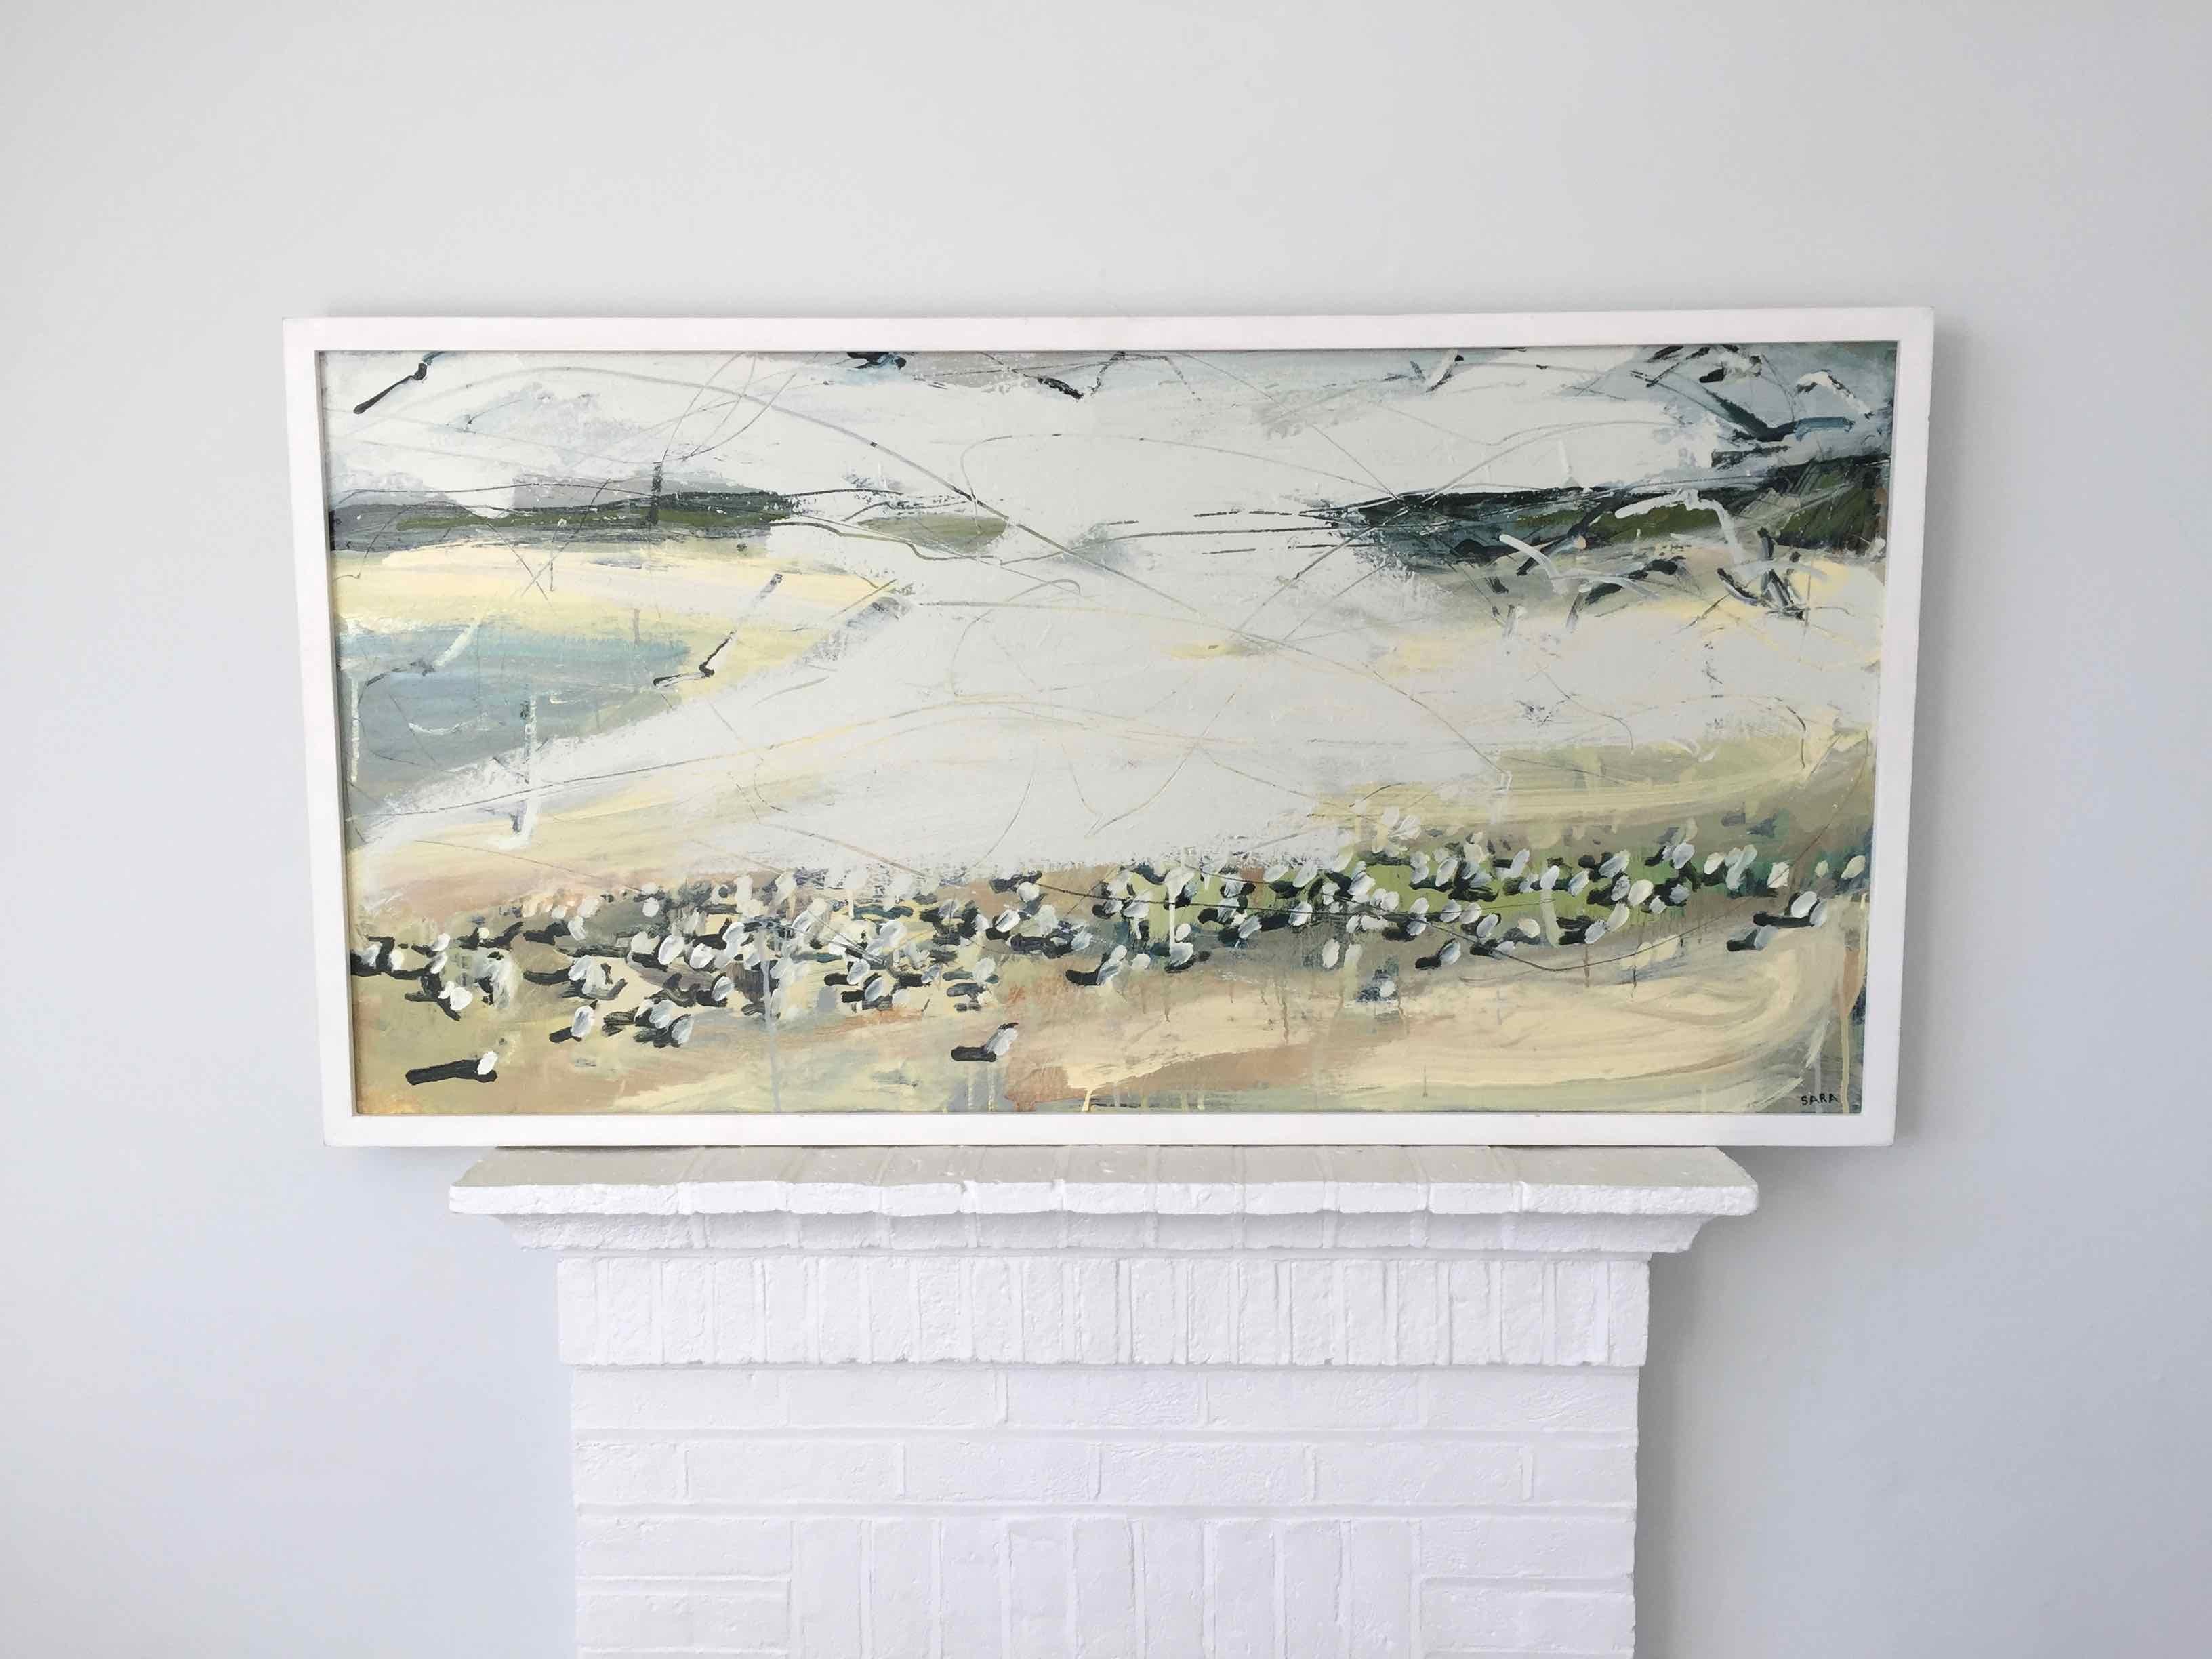 Sandpipers and Arctic Terns 1 (Northumberland), 2016, Oil on stretched canvas, 21 3/10 × 40 9/10 in, 54 × 104 cm by Sara Dudman RWA

Contemporary painterly qualities and drawn marks are essential components in Dudman's work, conveying an intuitive